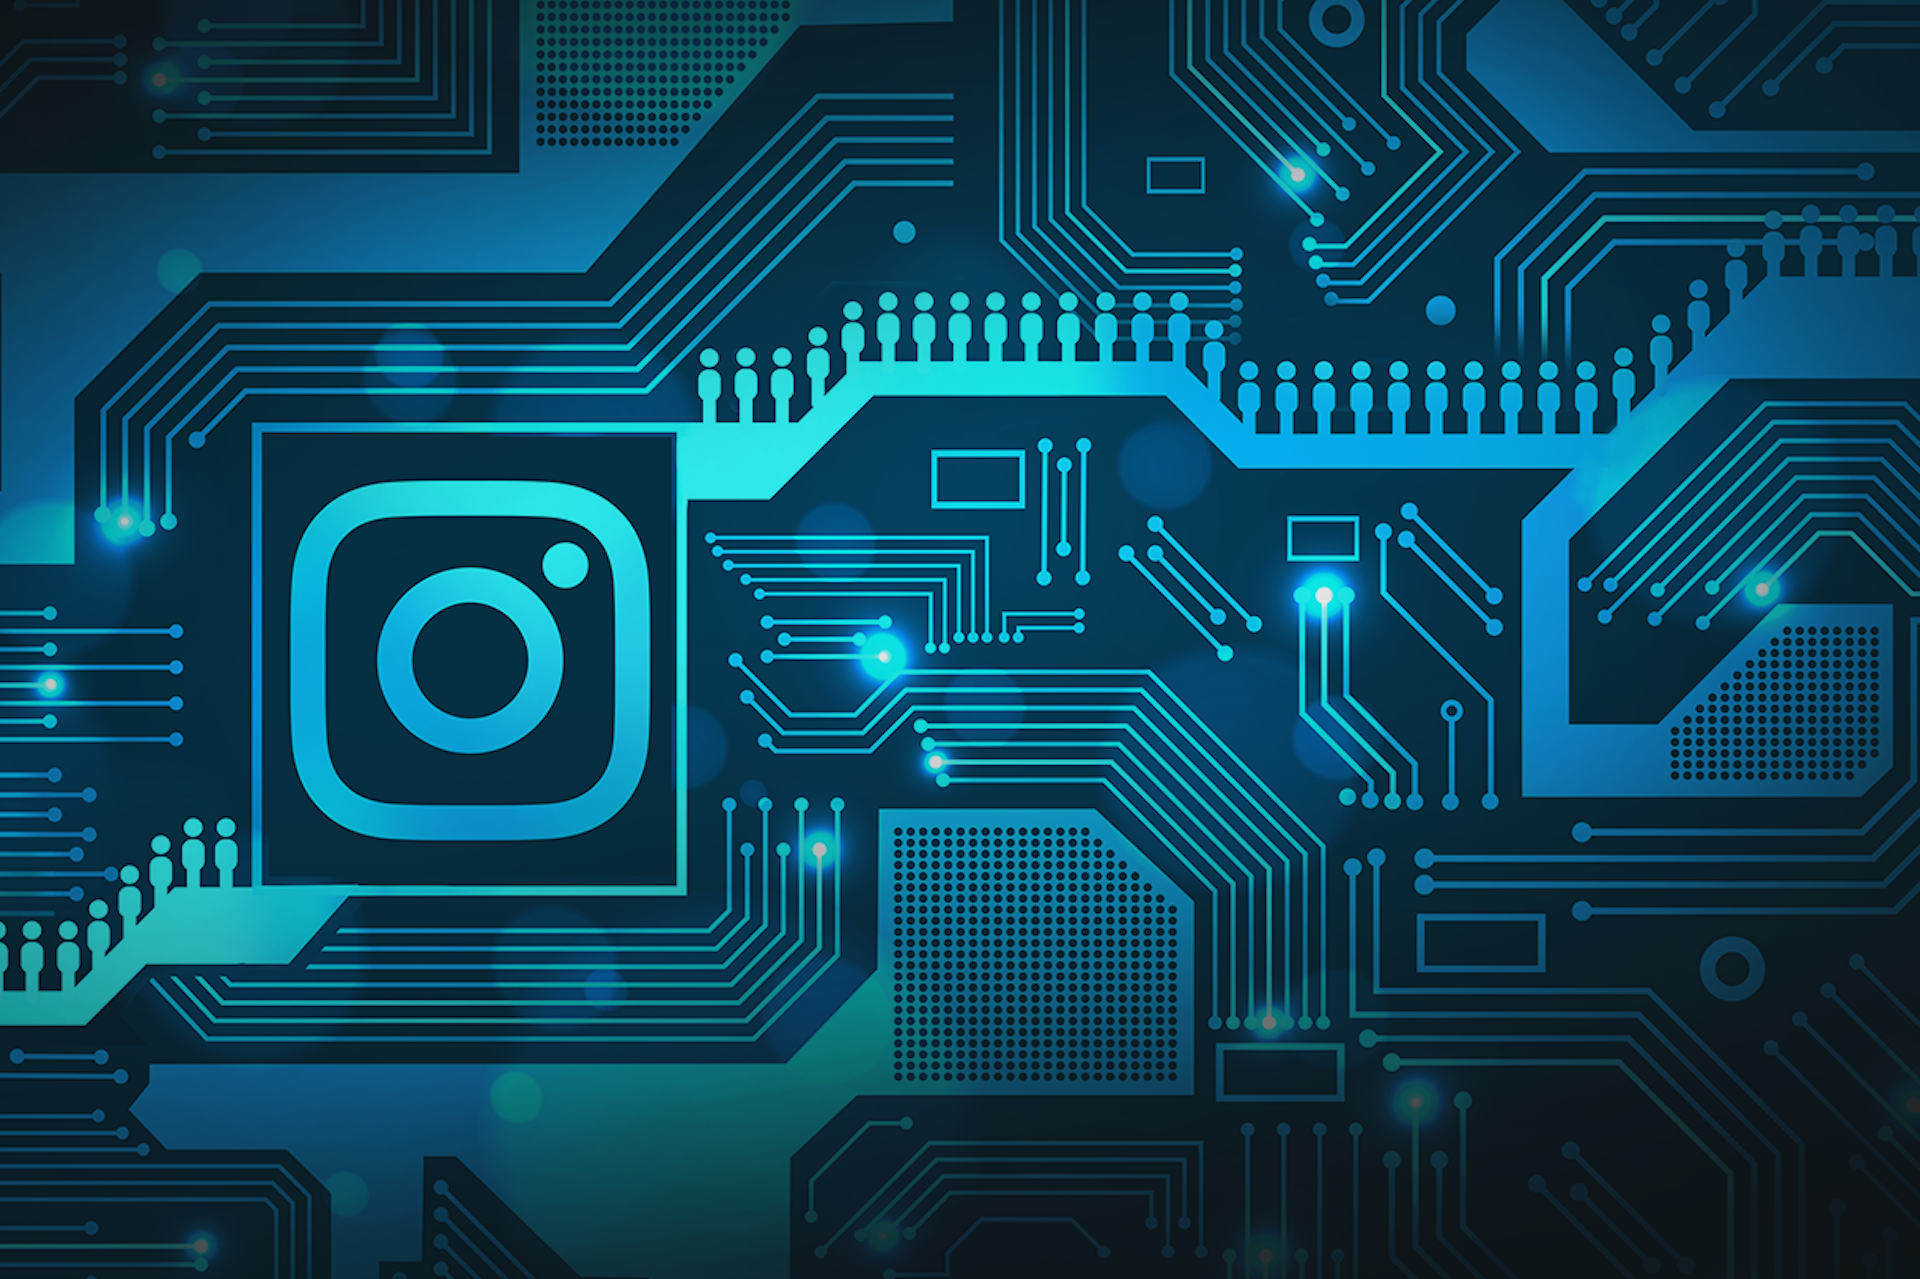 Illustration of the Instagram icon in blue in a technical setting on a blue board